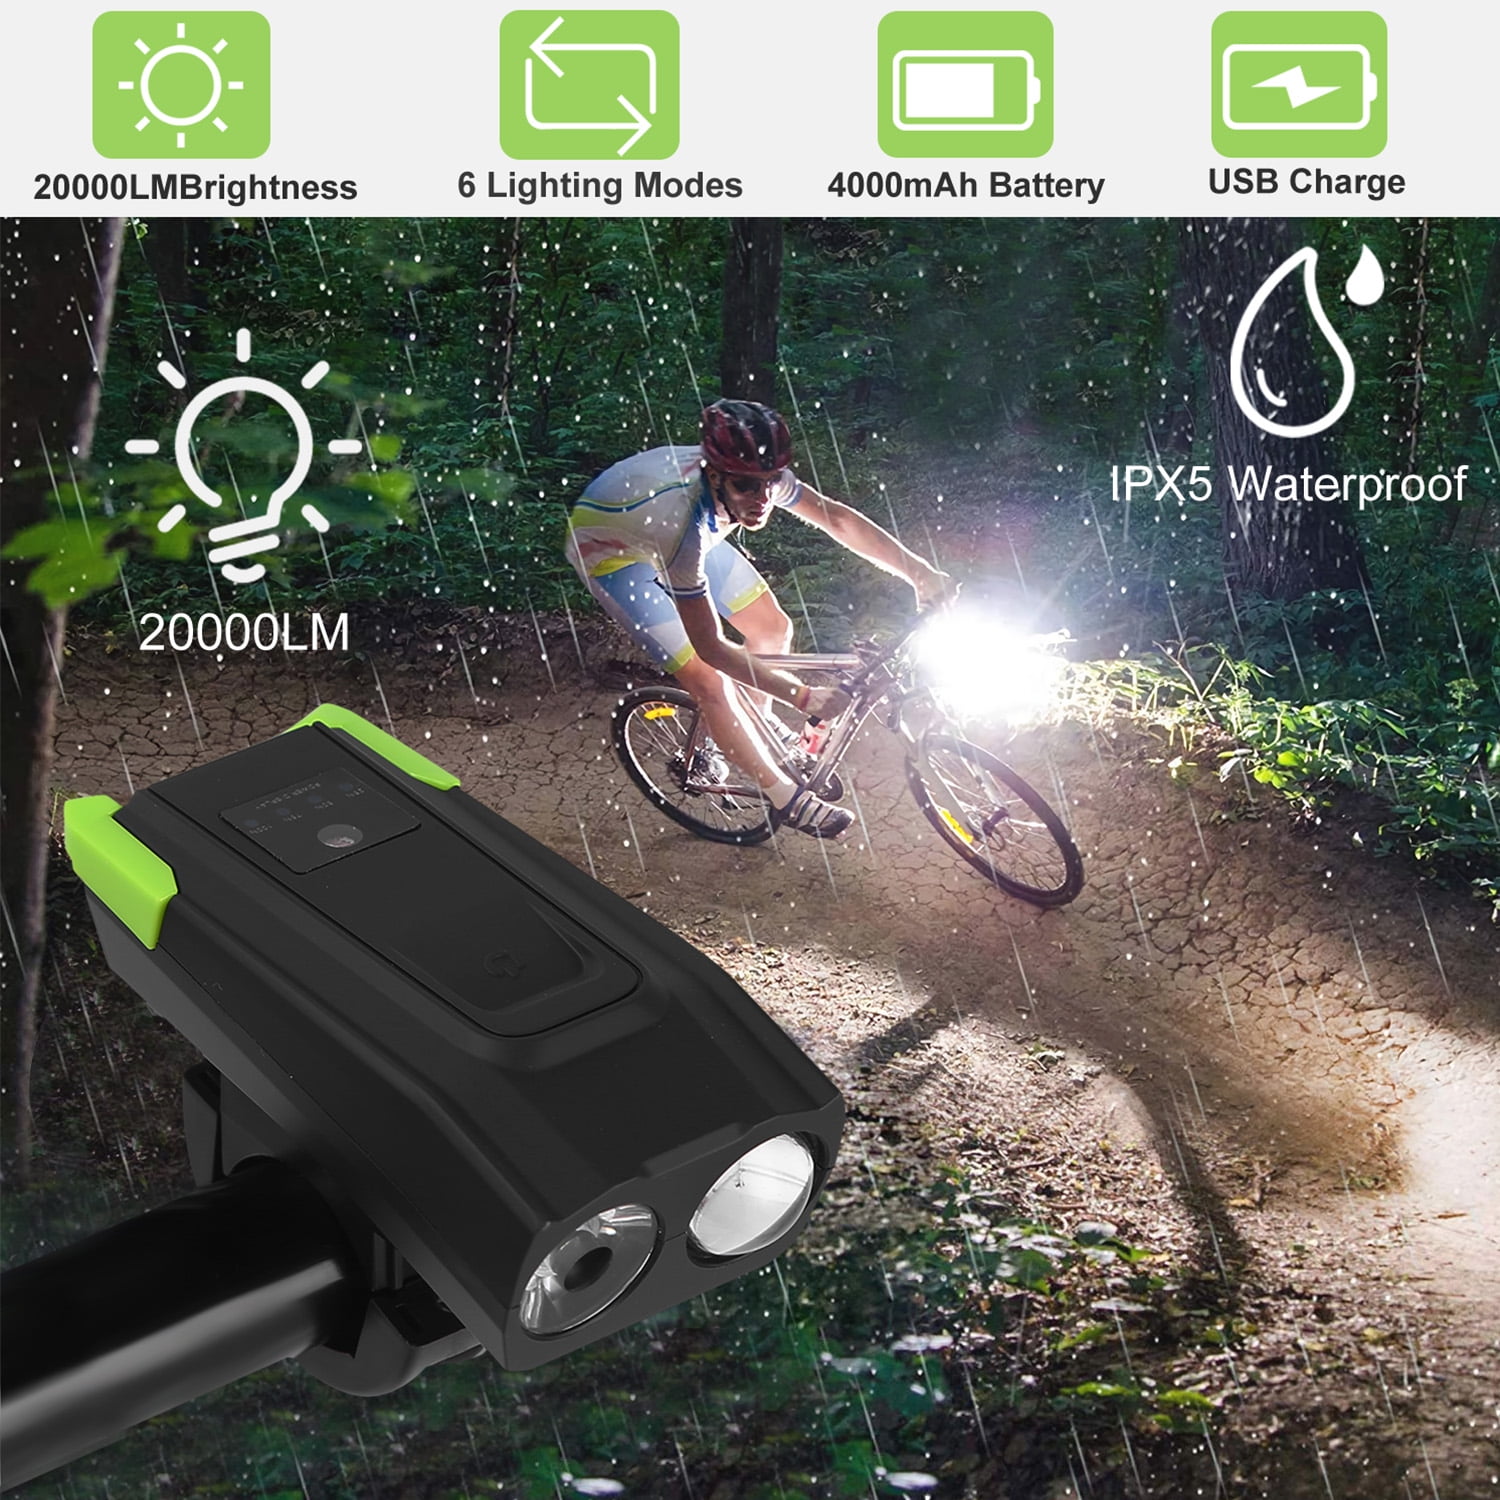 Bike Front Light USB Rechargeable Headlamp Power Bank Headlight for Night Riding 